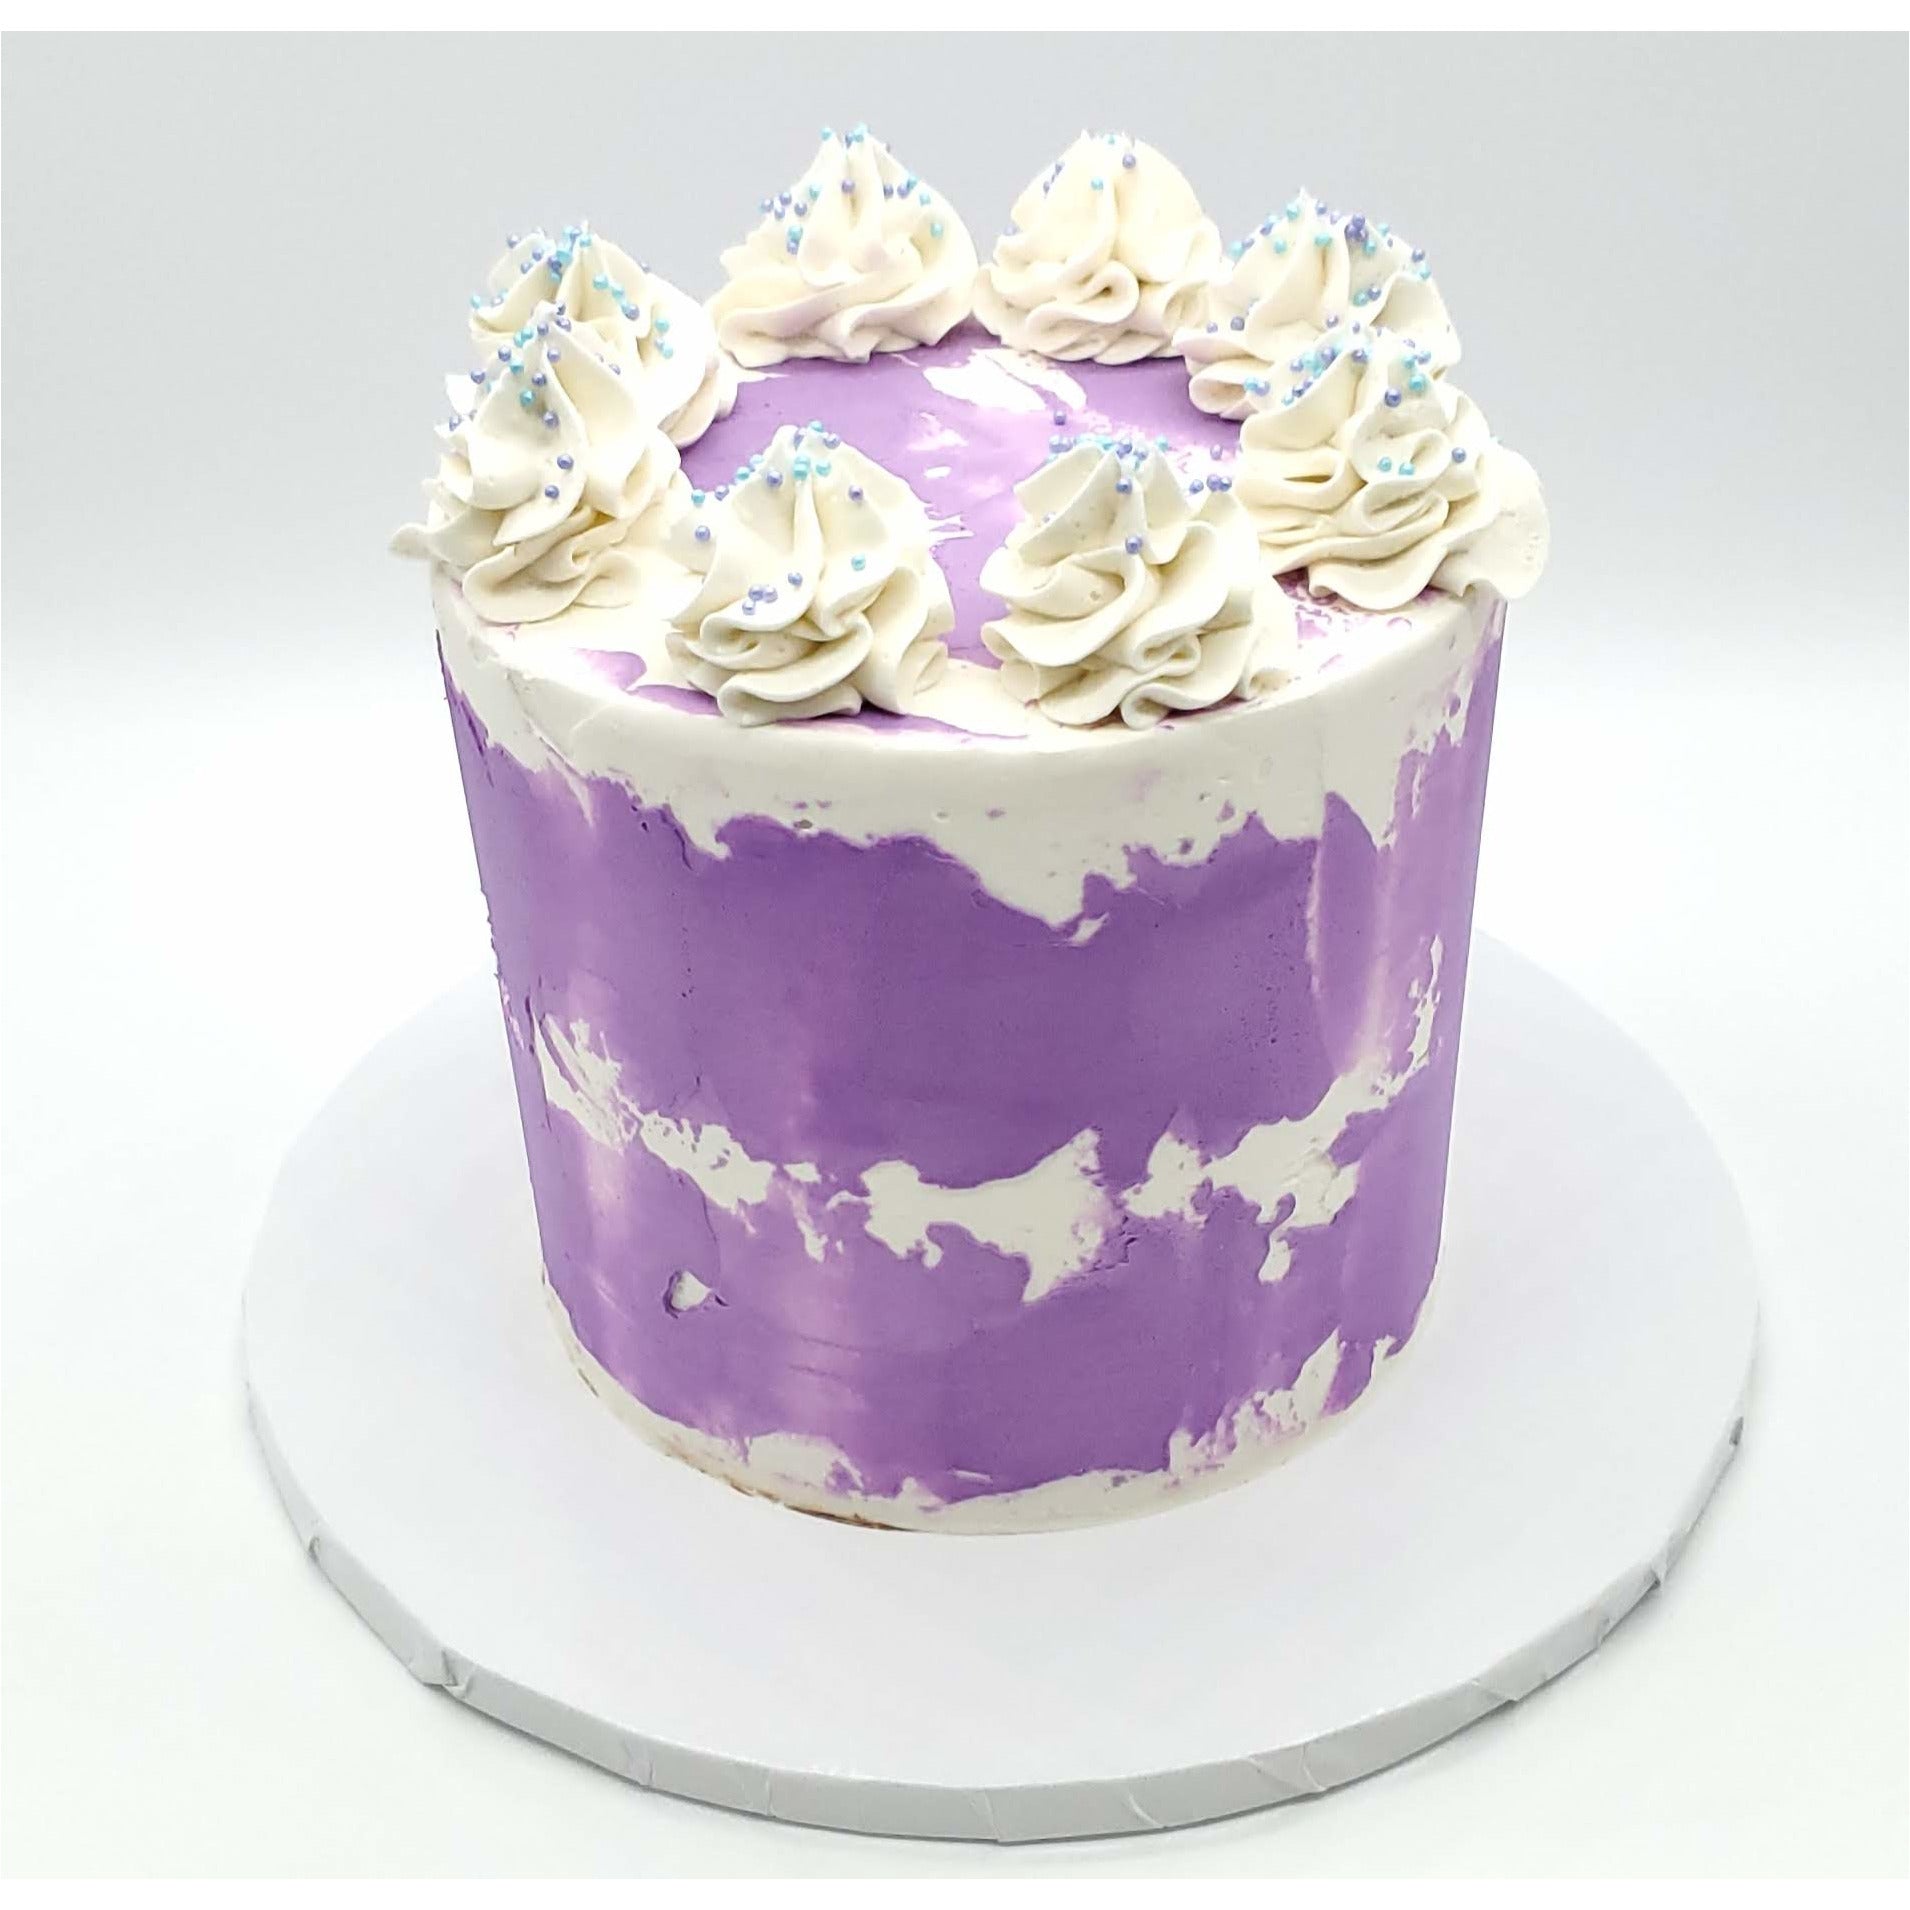 6 Inch Purple Tōn'd Cake with Frosting and Sprinkles on top